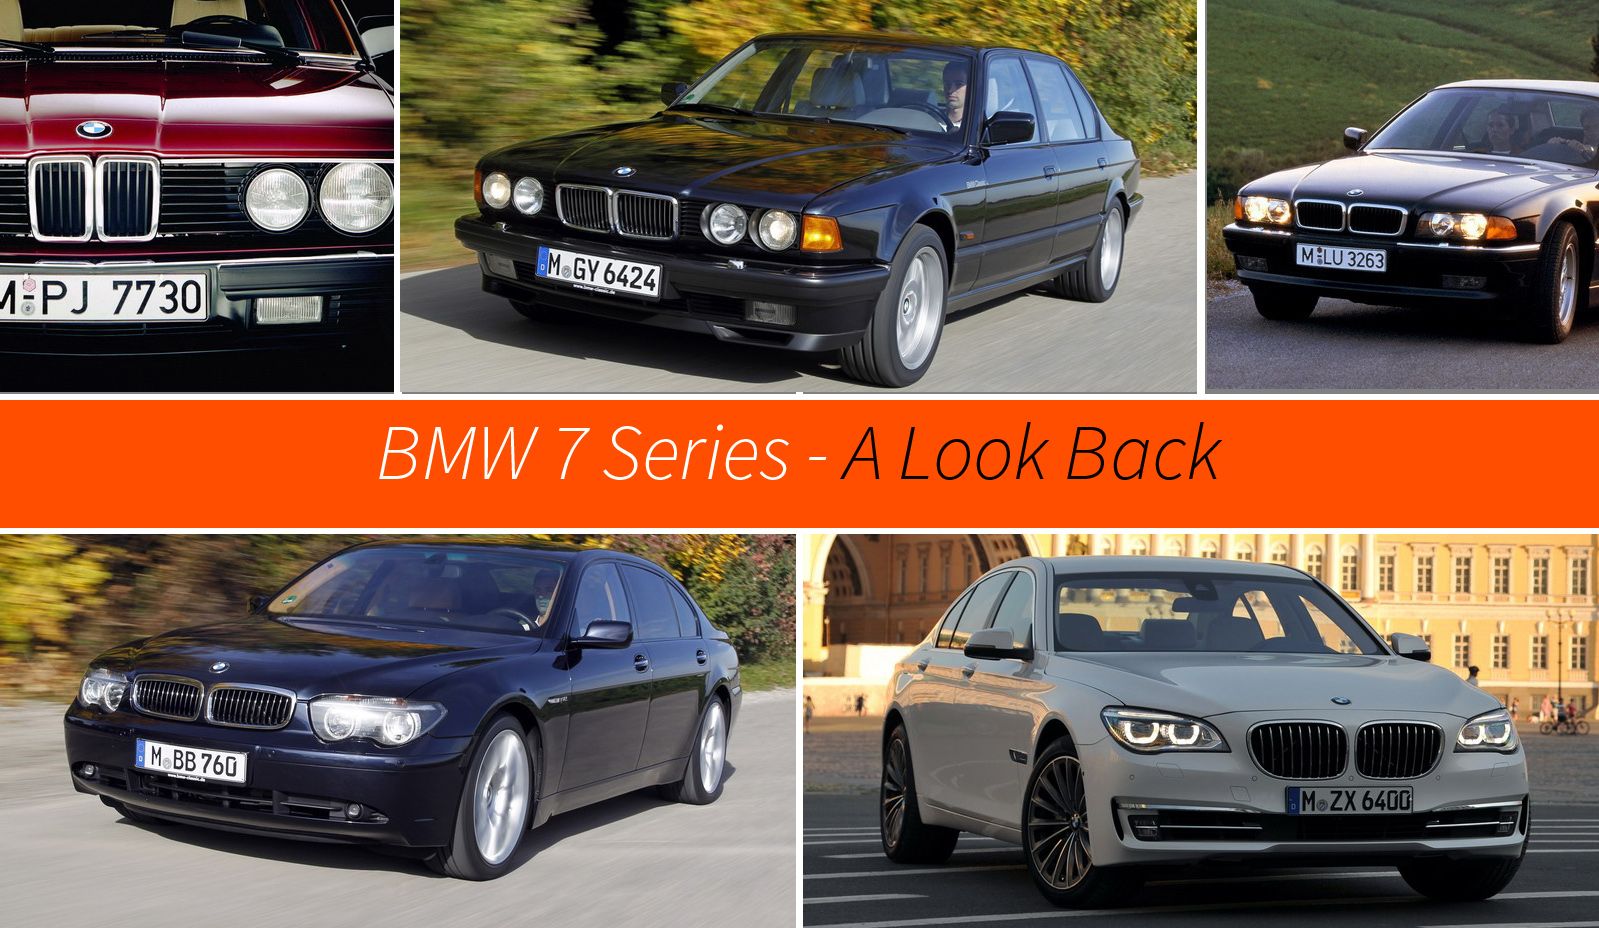 BMW 7 Series - A Look Back